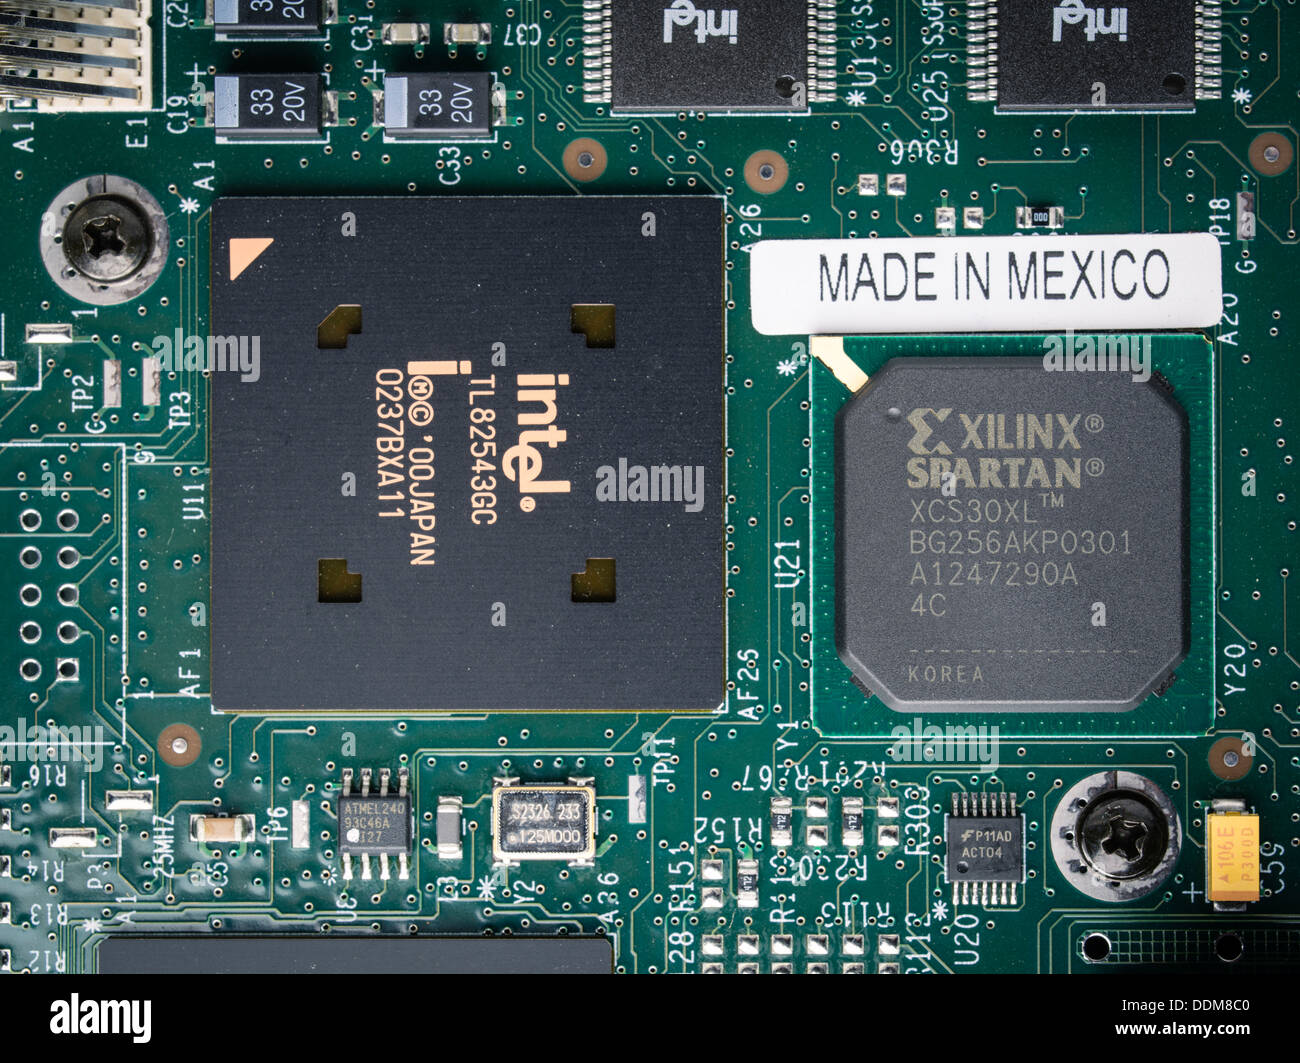 Made in Mexico Circuit Board, with Intel Microchip Stock Photo